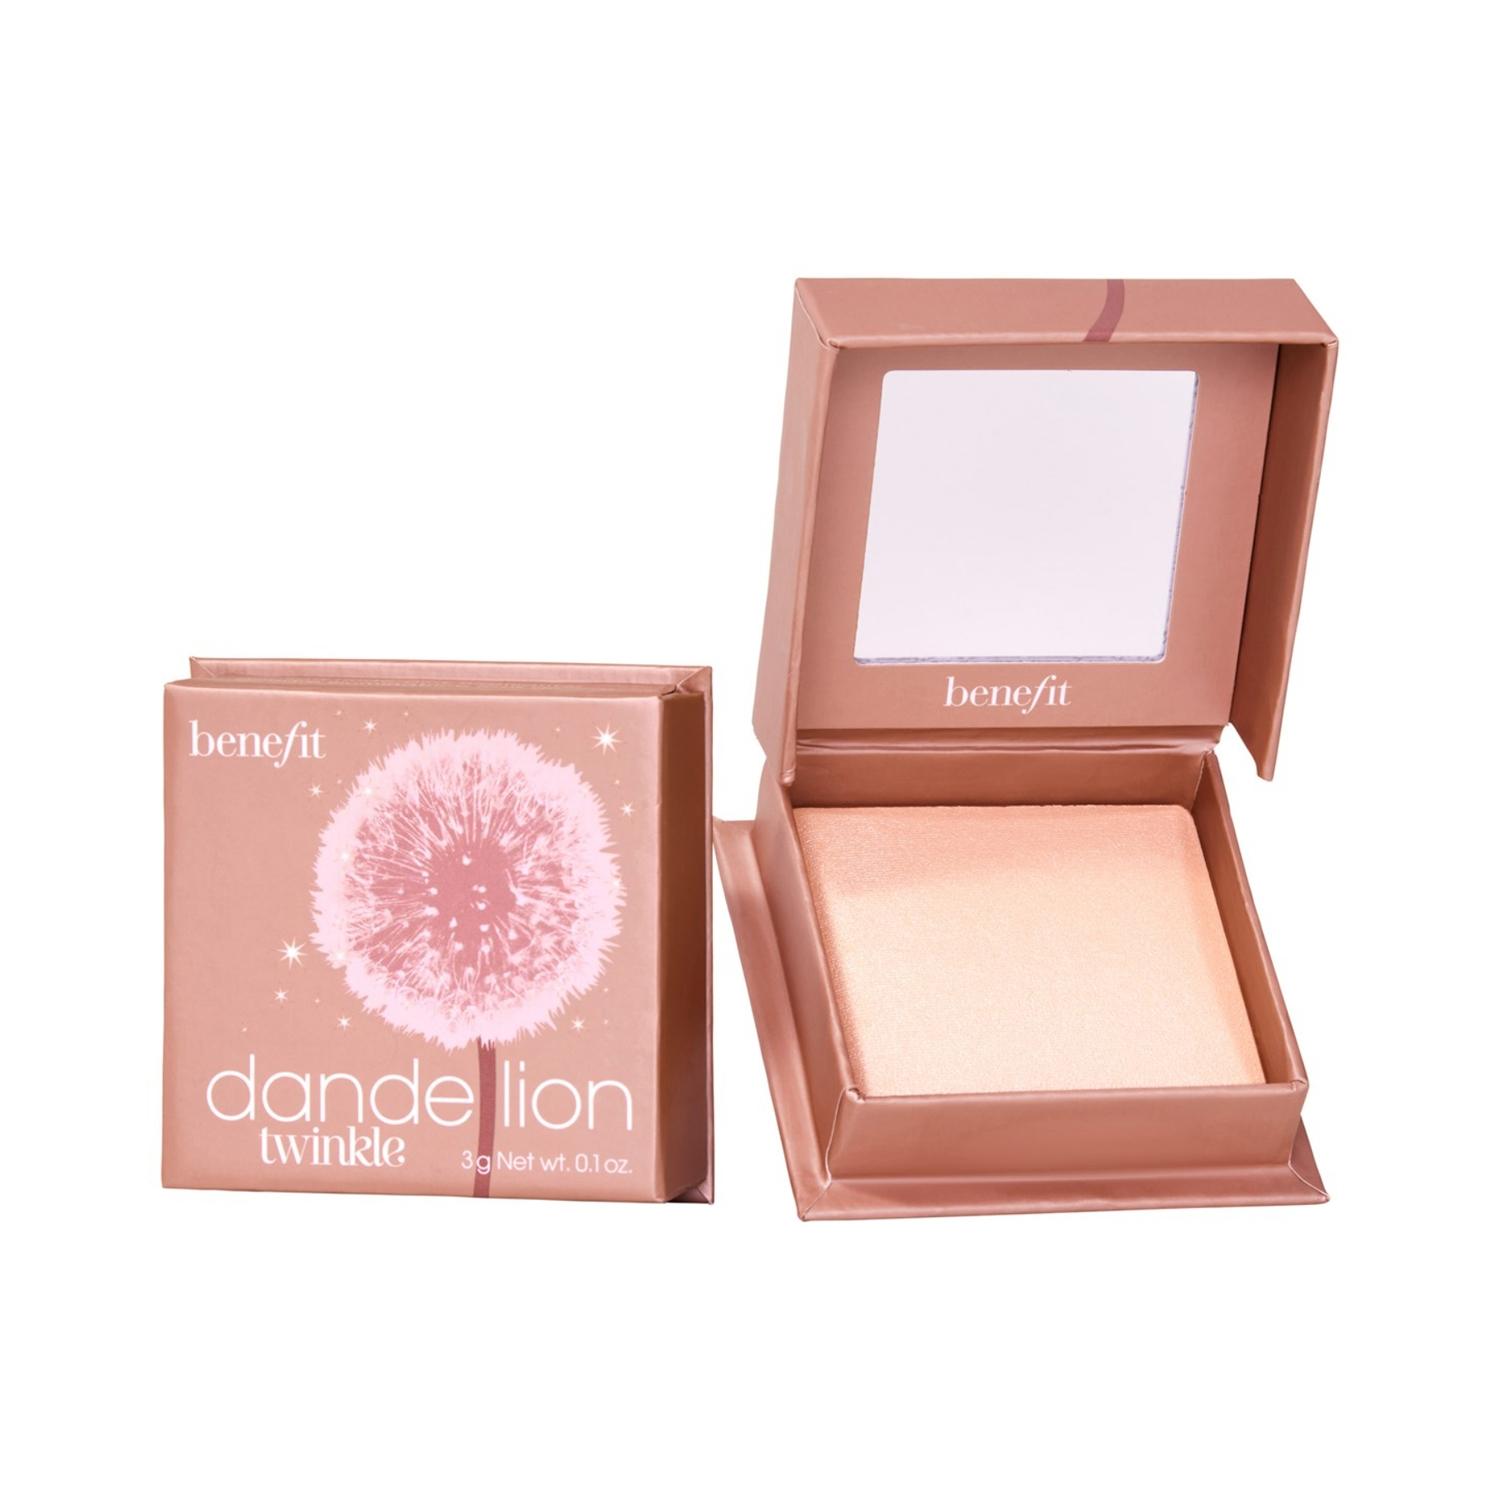 Benefit Cosmetics Dandelion Twinkle Soft Highlighter - Nude Pink (3g)